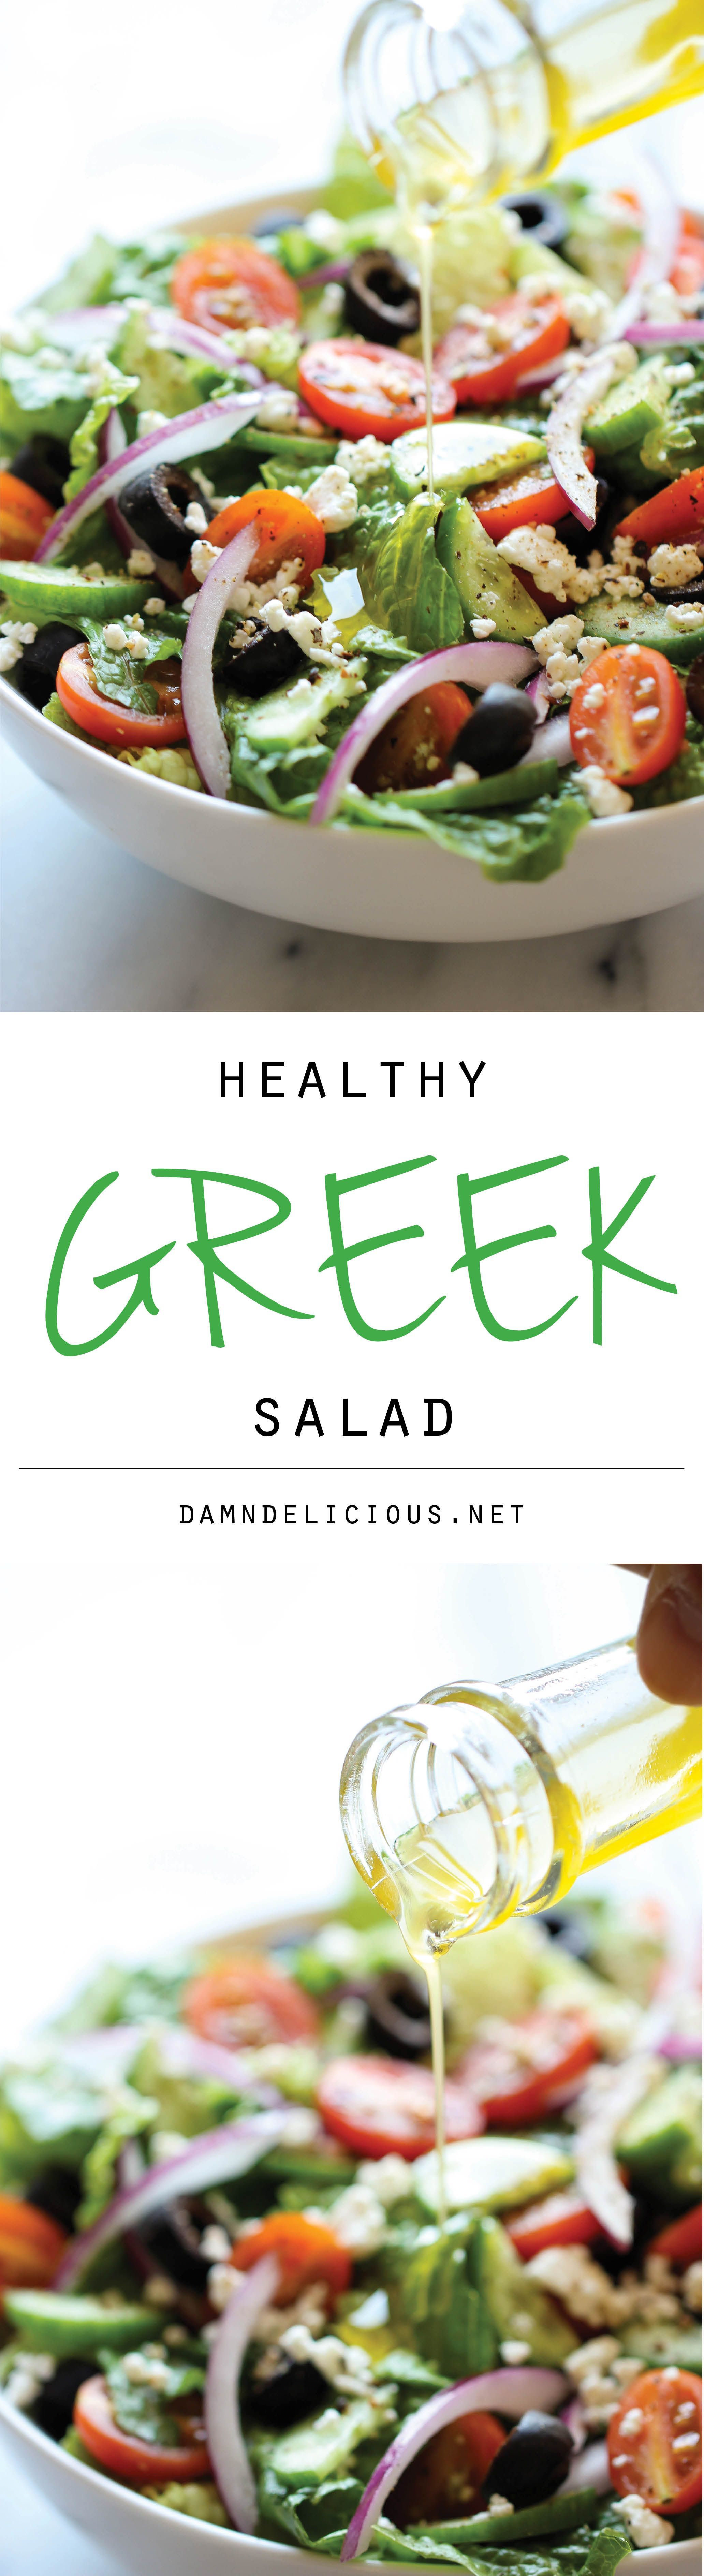 Greek Salad – This healthy Greek salad is absolutely amazing when tossed in a light and refreshing lemon vinaigrette!